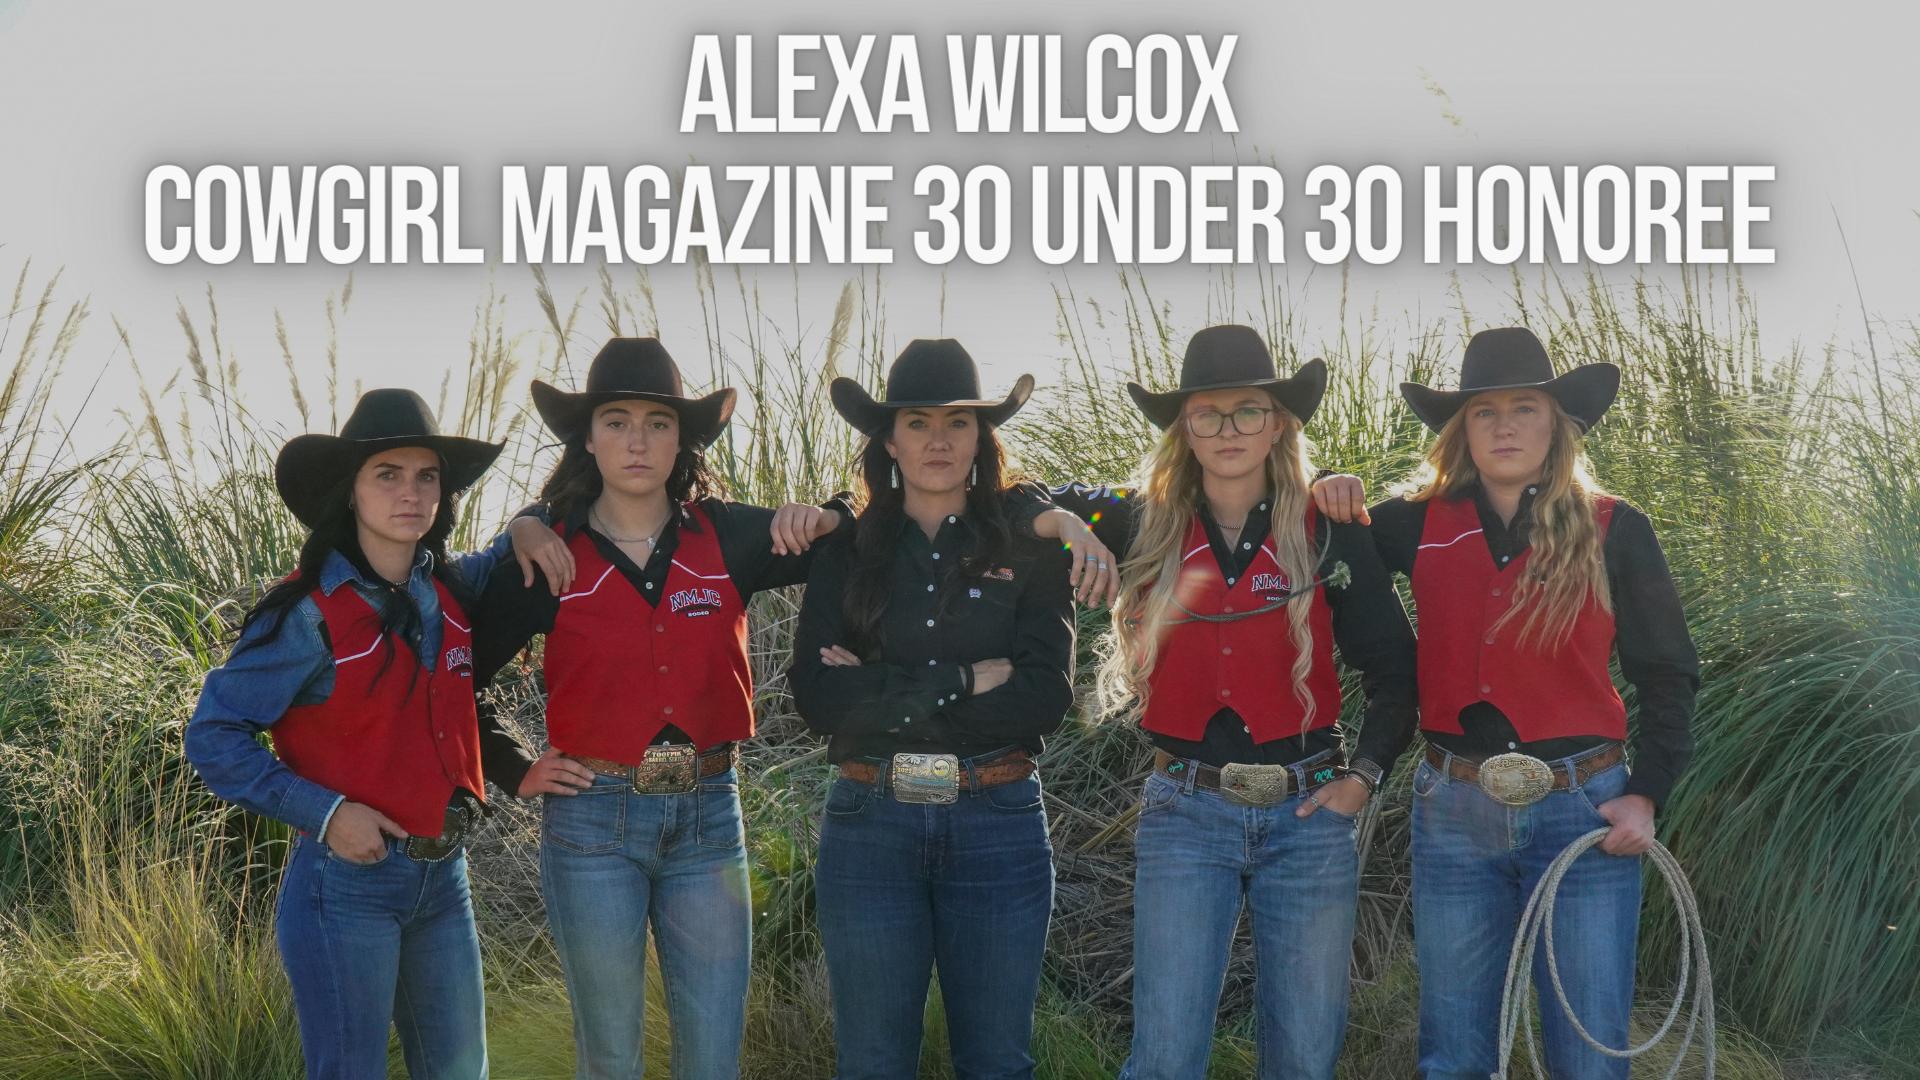 Alexa Wilcox Honored as Member of the COWGIRL 30 Under 30